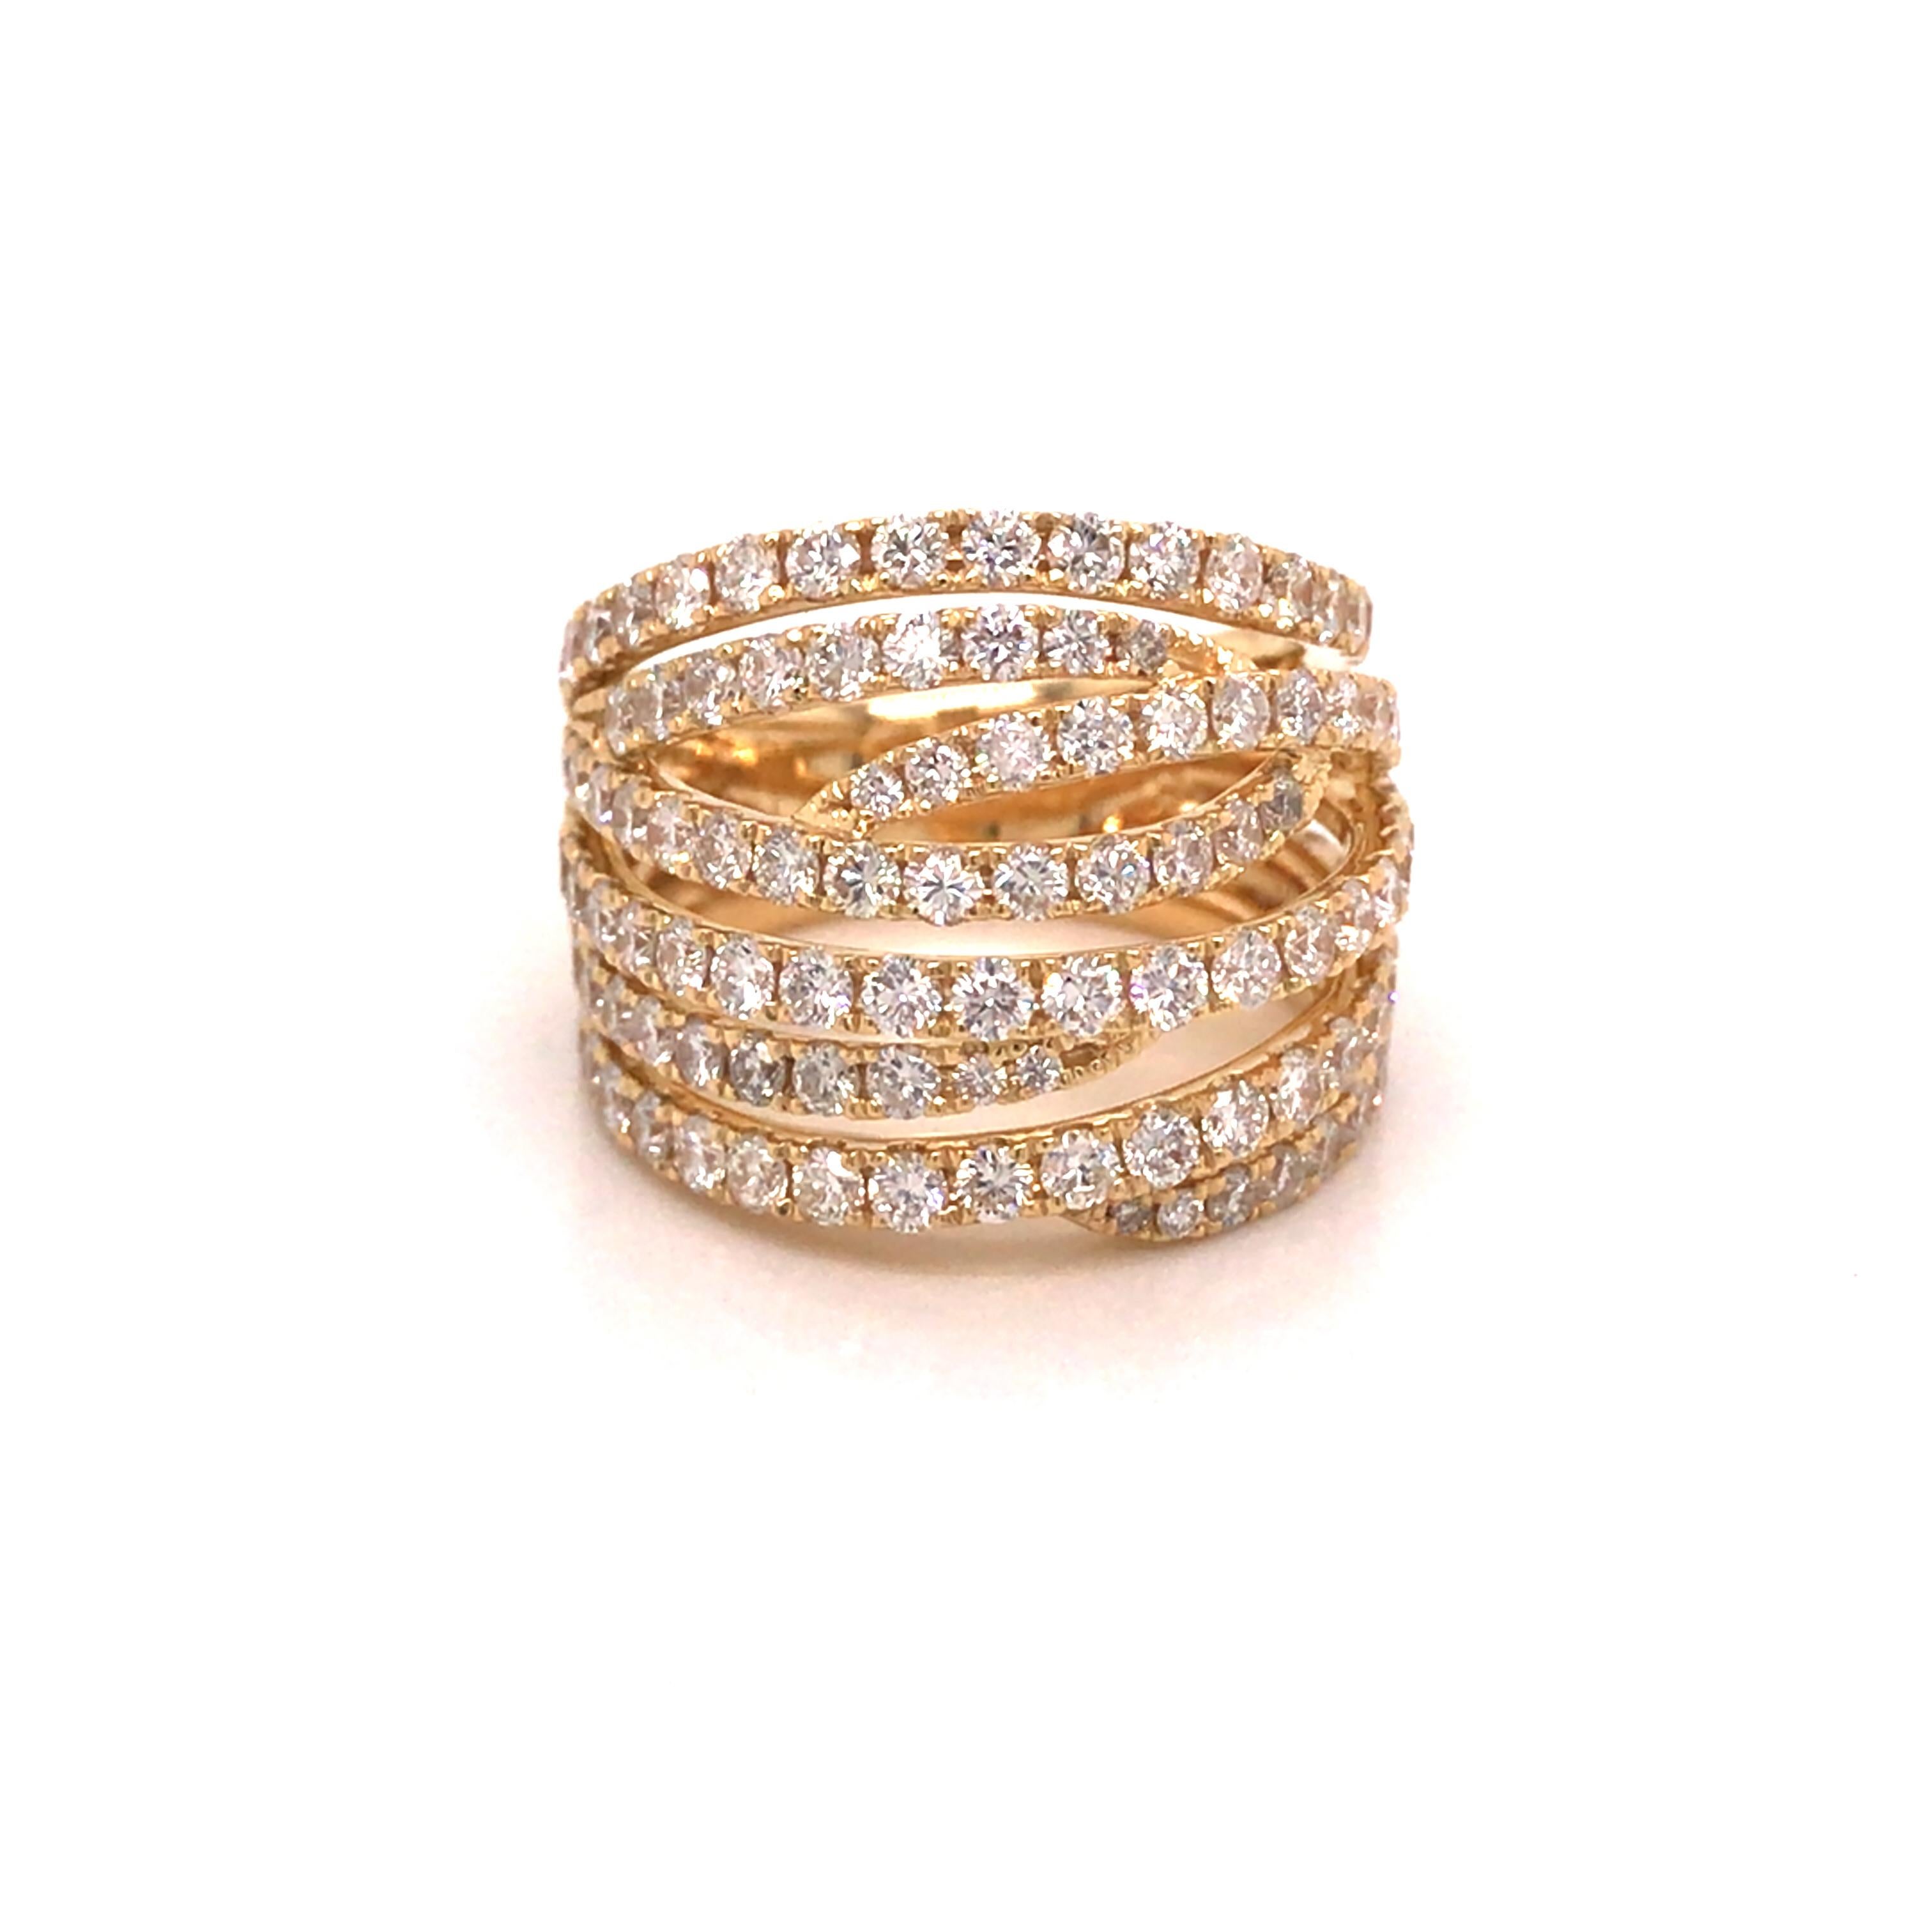 Diamond Crossover Band in 18K Yellow Gold.  Round Brilliant Cut Diamonds weighing 3.05 carat total weight, G-H in color and VS-SI in clarity are expertly set.  The Band measures 5/8 inch in width.  Ring size 6. 9.33 grams.